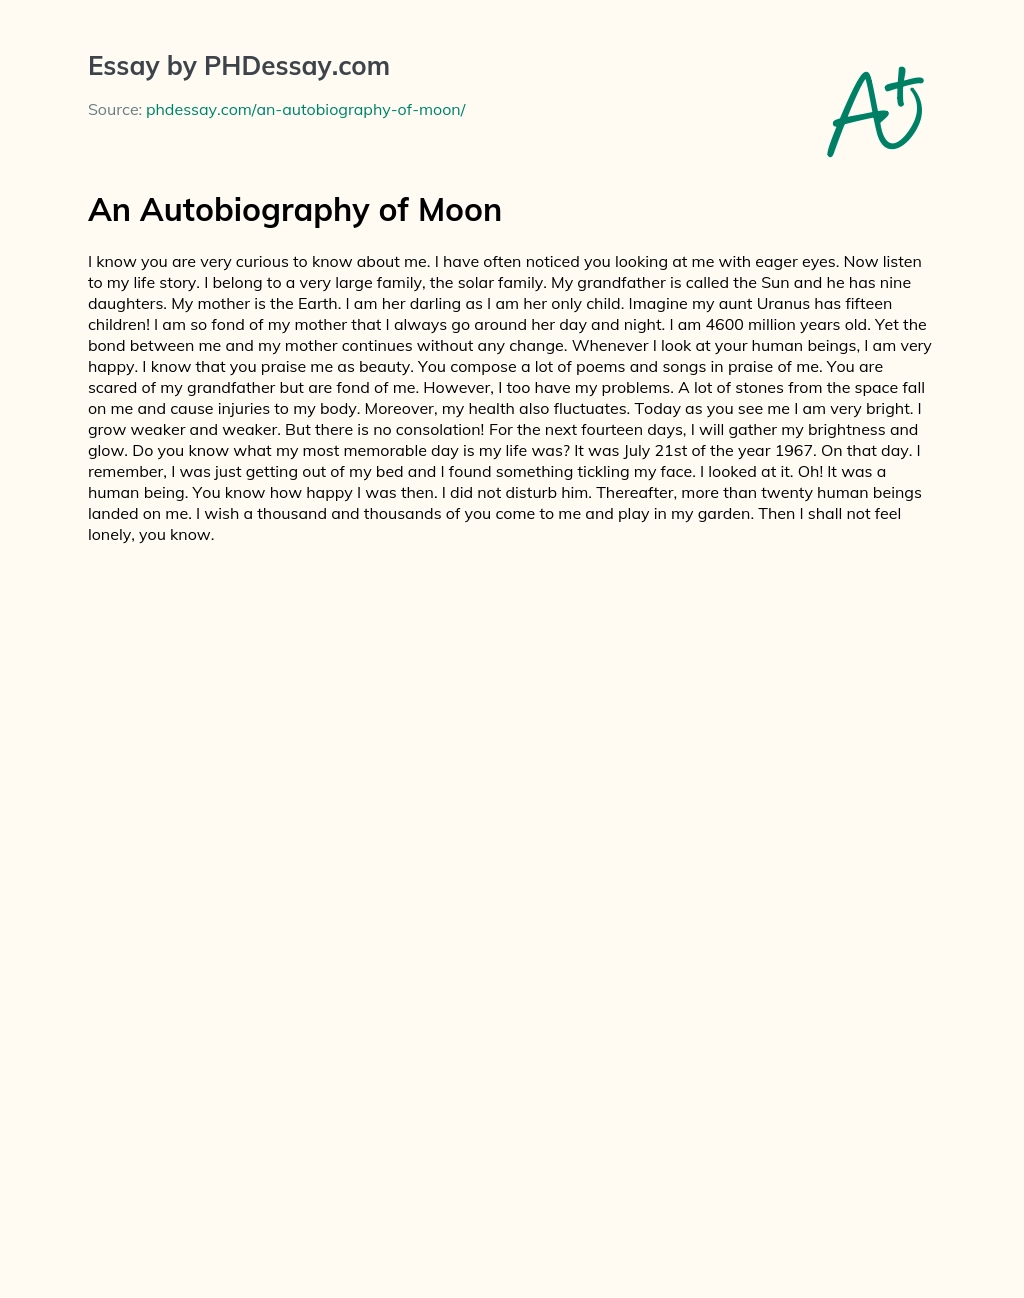 An Autobiography of Moon essay